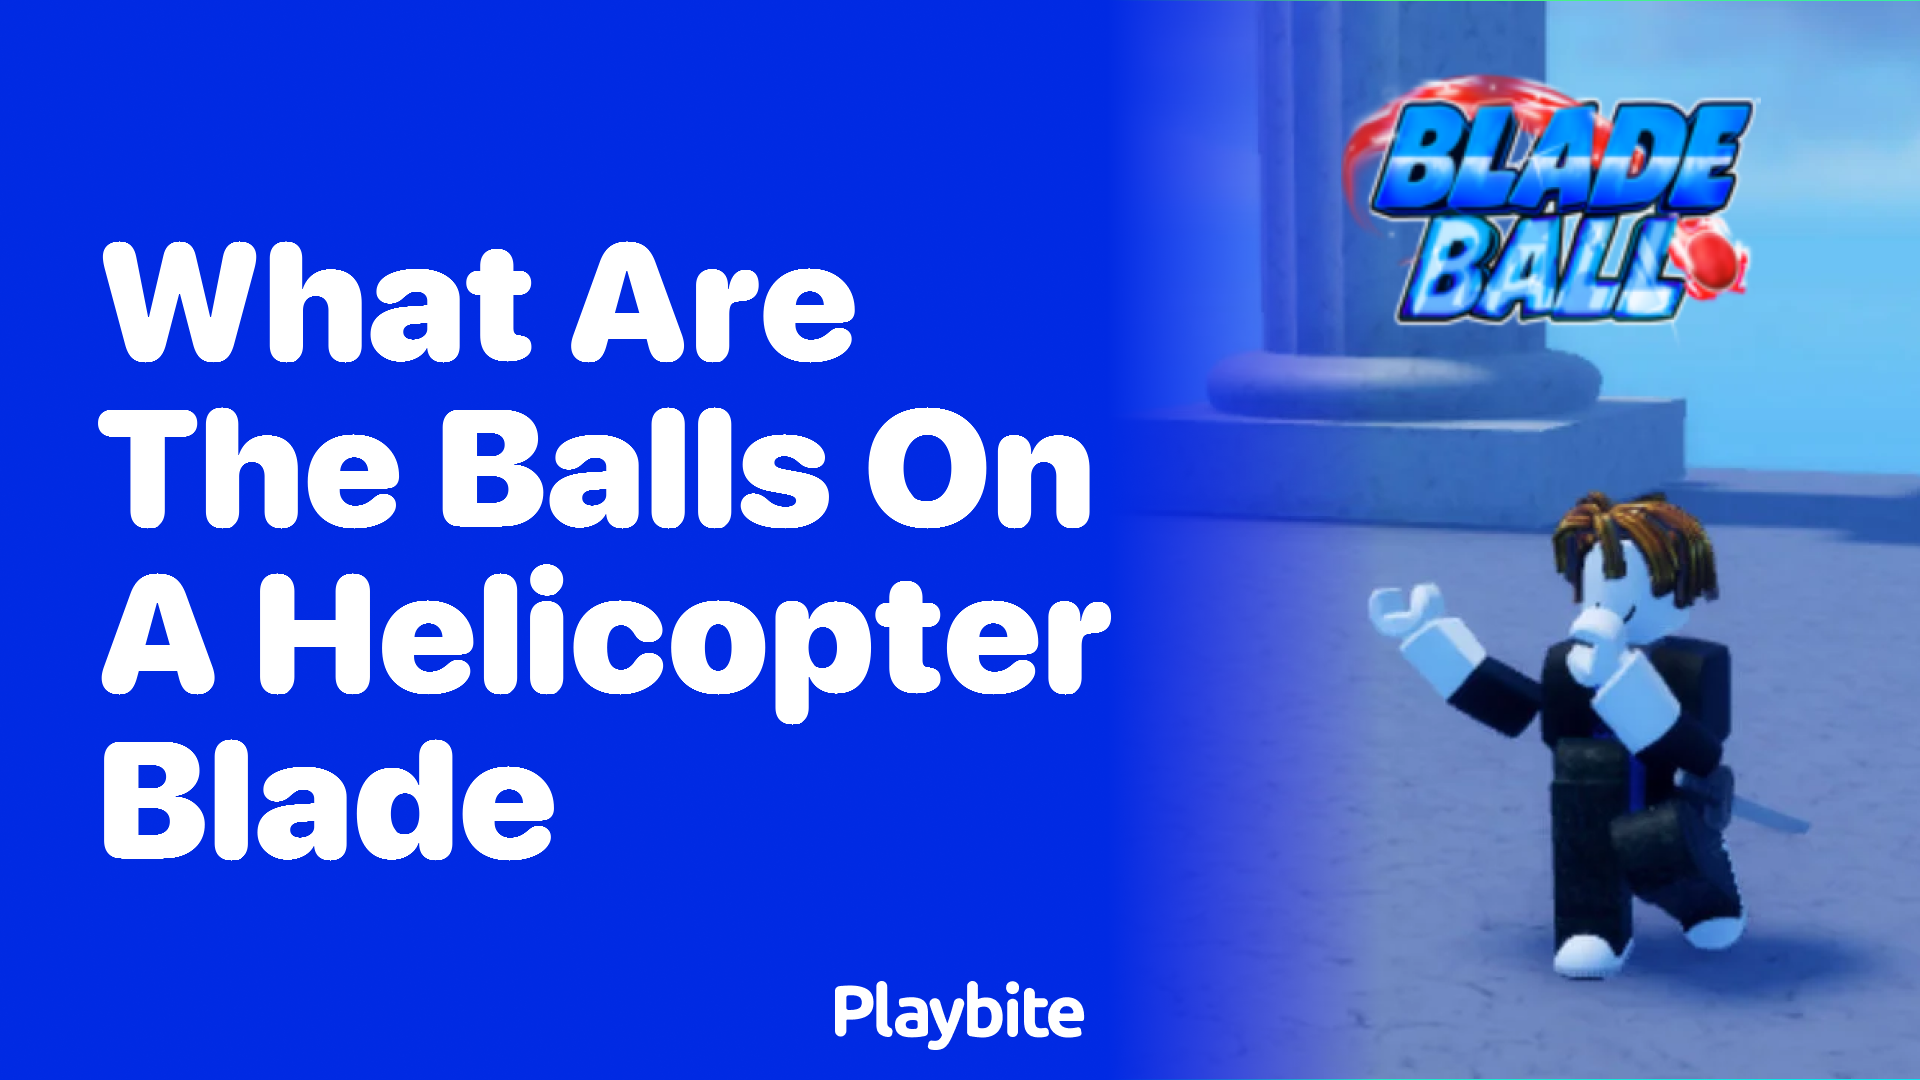 What Are the Balls on a Helicopter Blade?